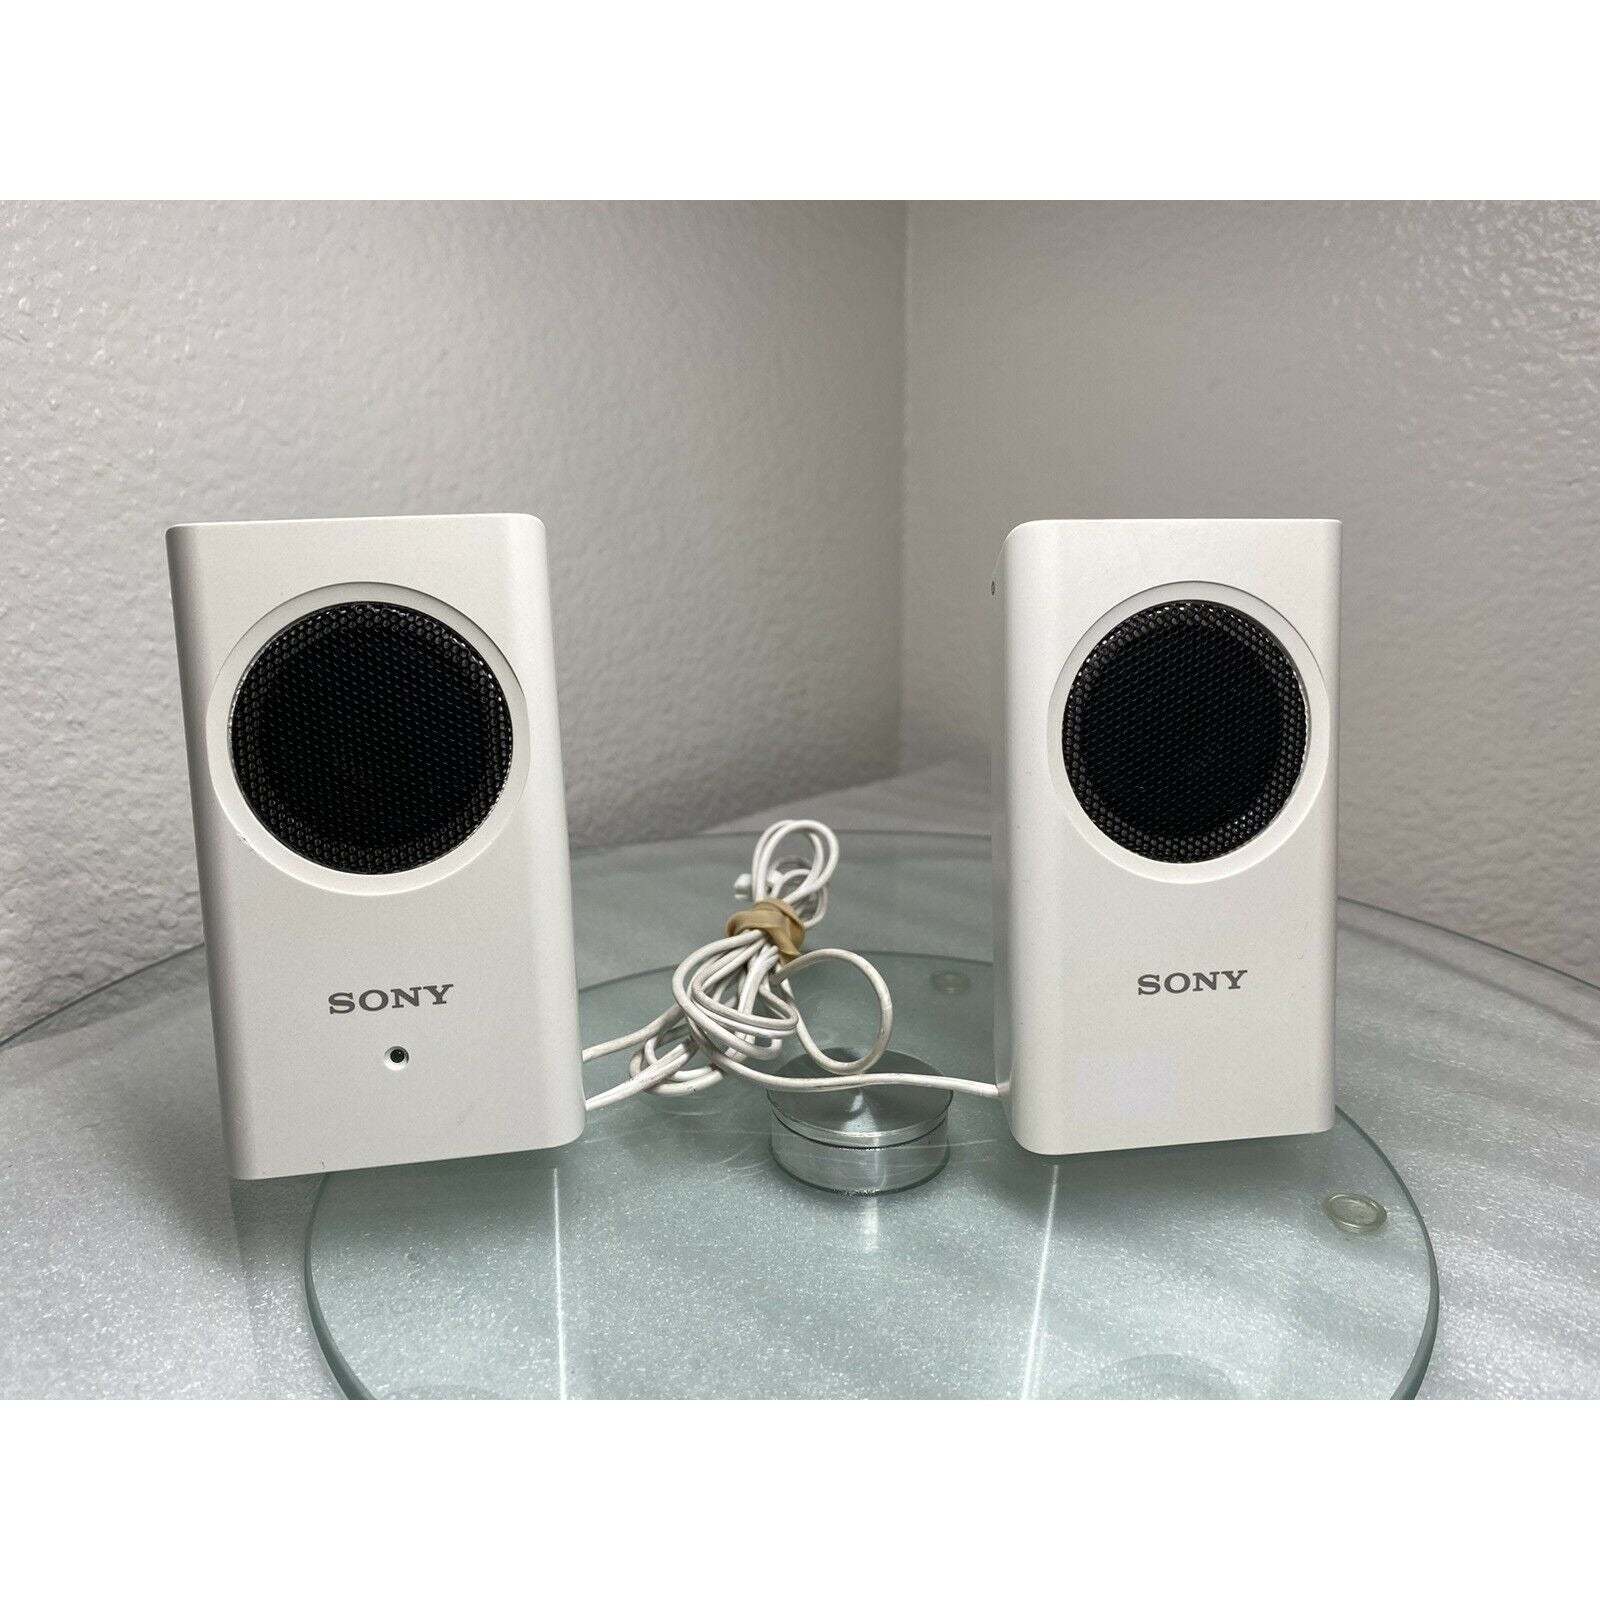 Primary image for Sony SRS-M30 Portable Active Mini Speaker System